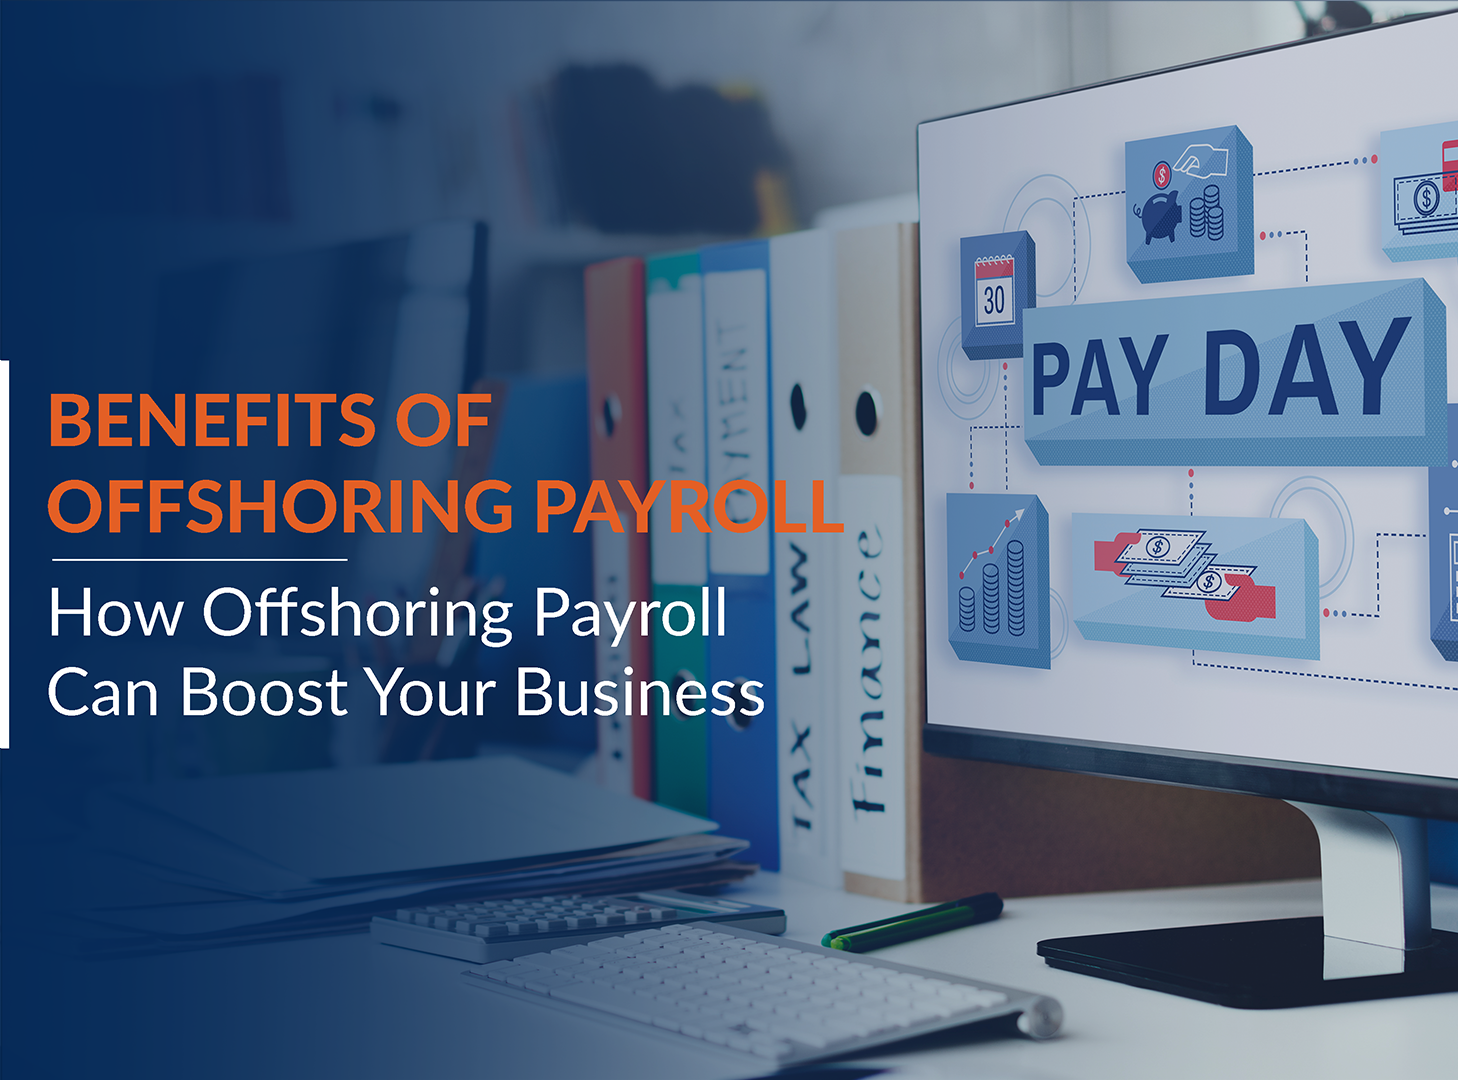 Benefits of Offshoring Payroll